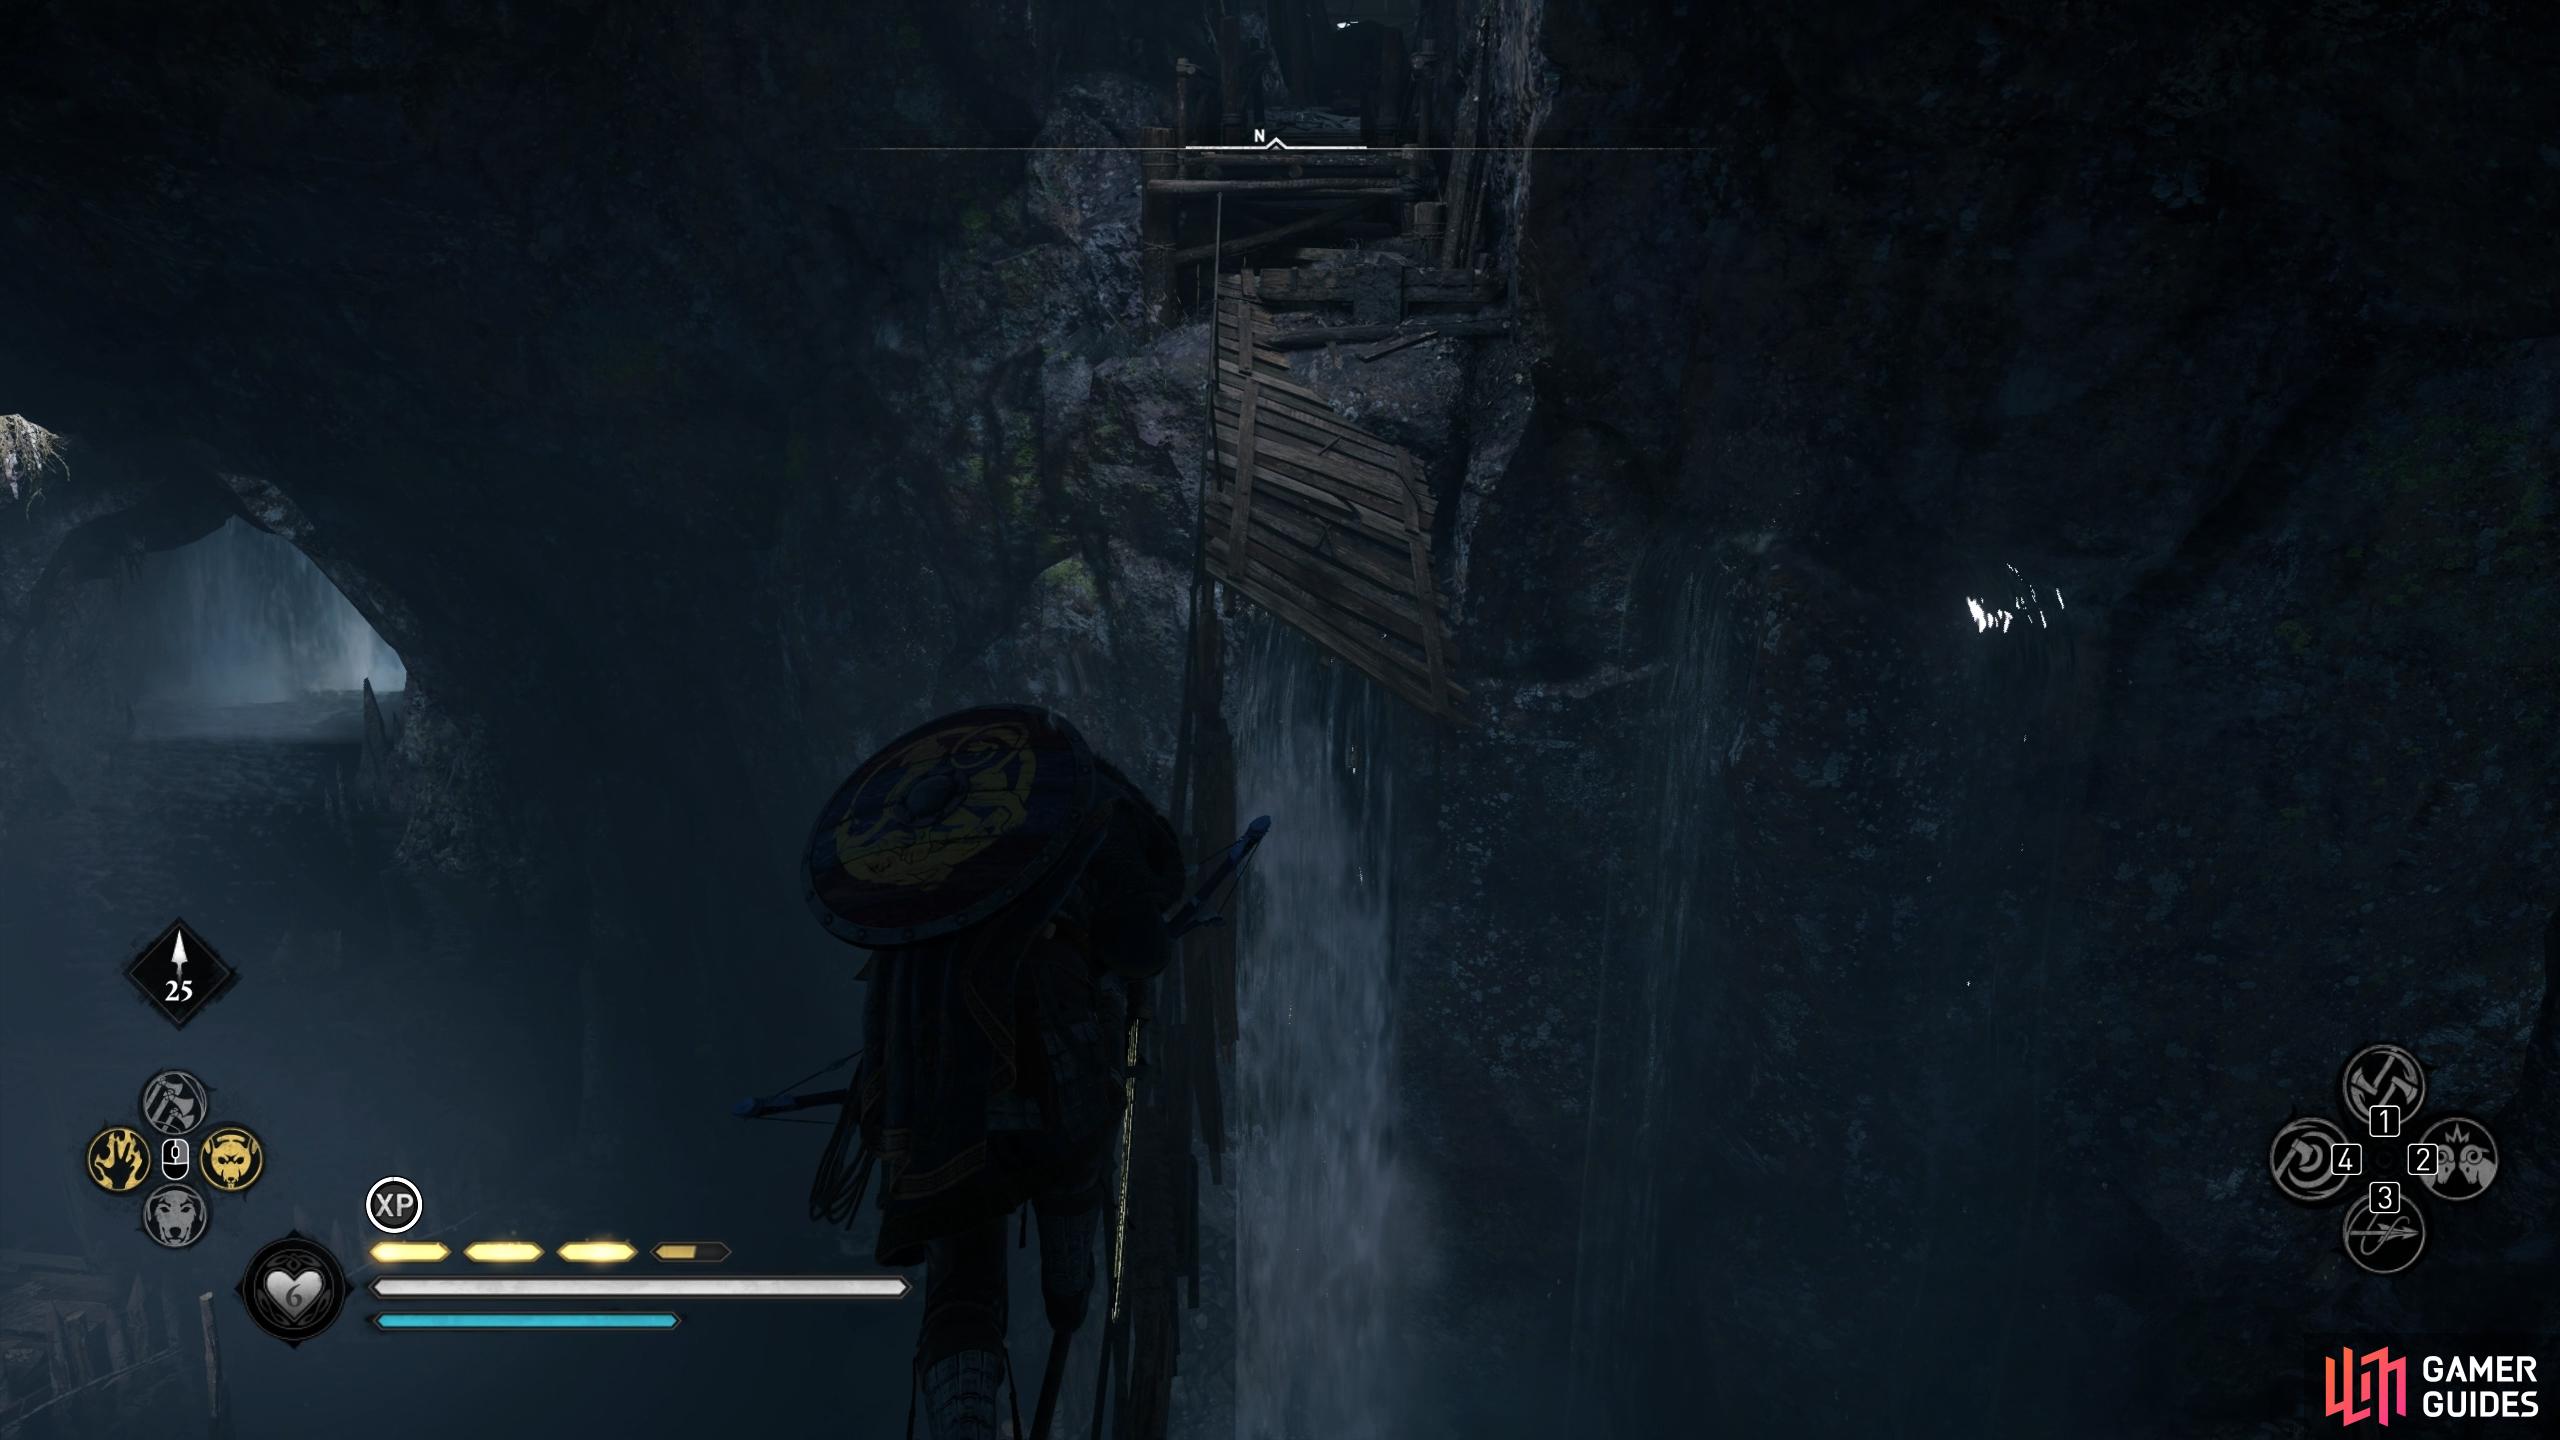 Once youve looted the chest for the breastplate, follow the rope line out of the cave.